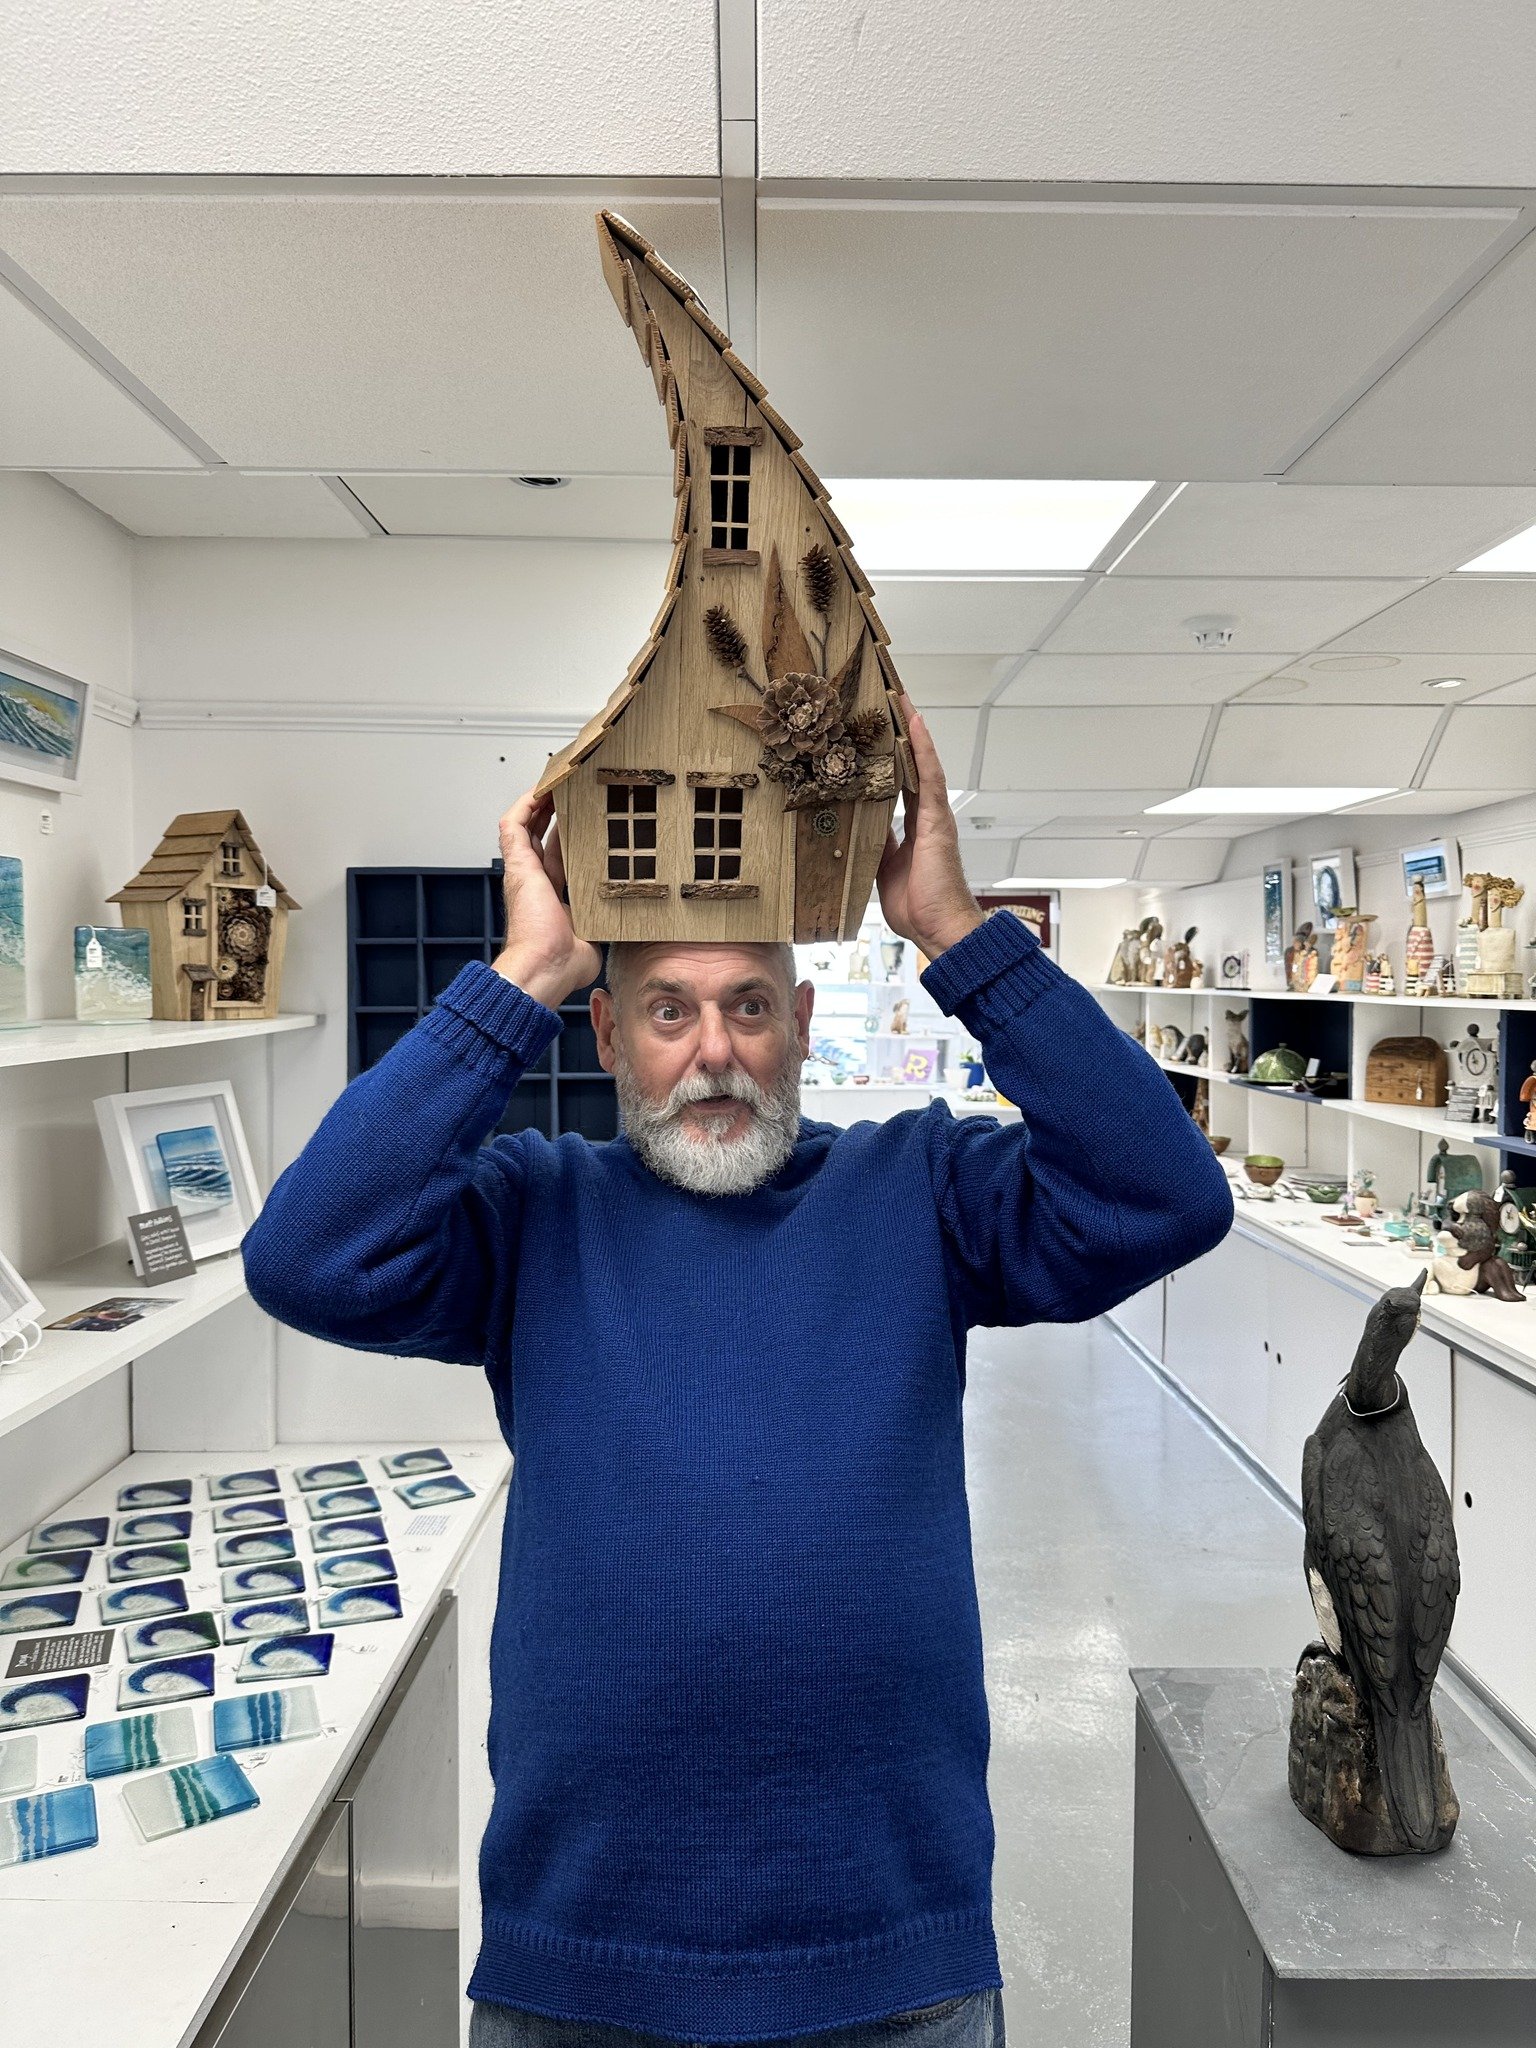 The bank holiday weekend is coming... woohoo !🤩
Anyone planning on getting out in the garden this weekend?  Karl is really loving the wooden houses we have in stock, his grandsons love having them to play with in the garden too. Each of them are mad